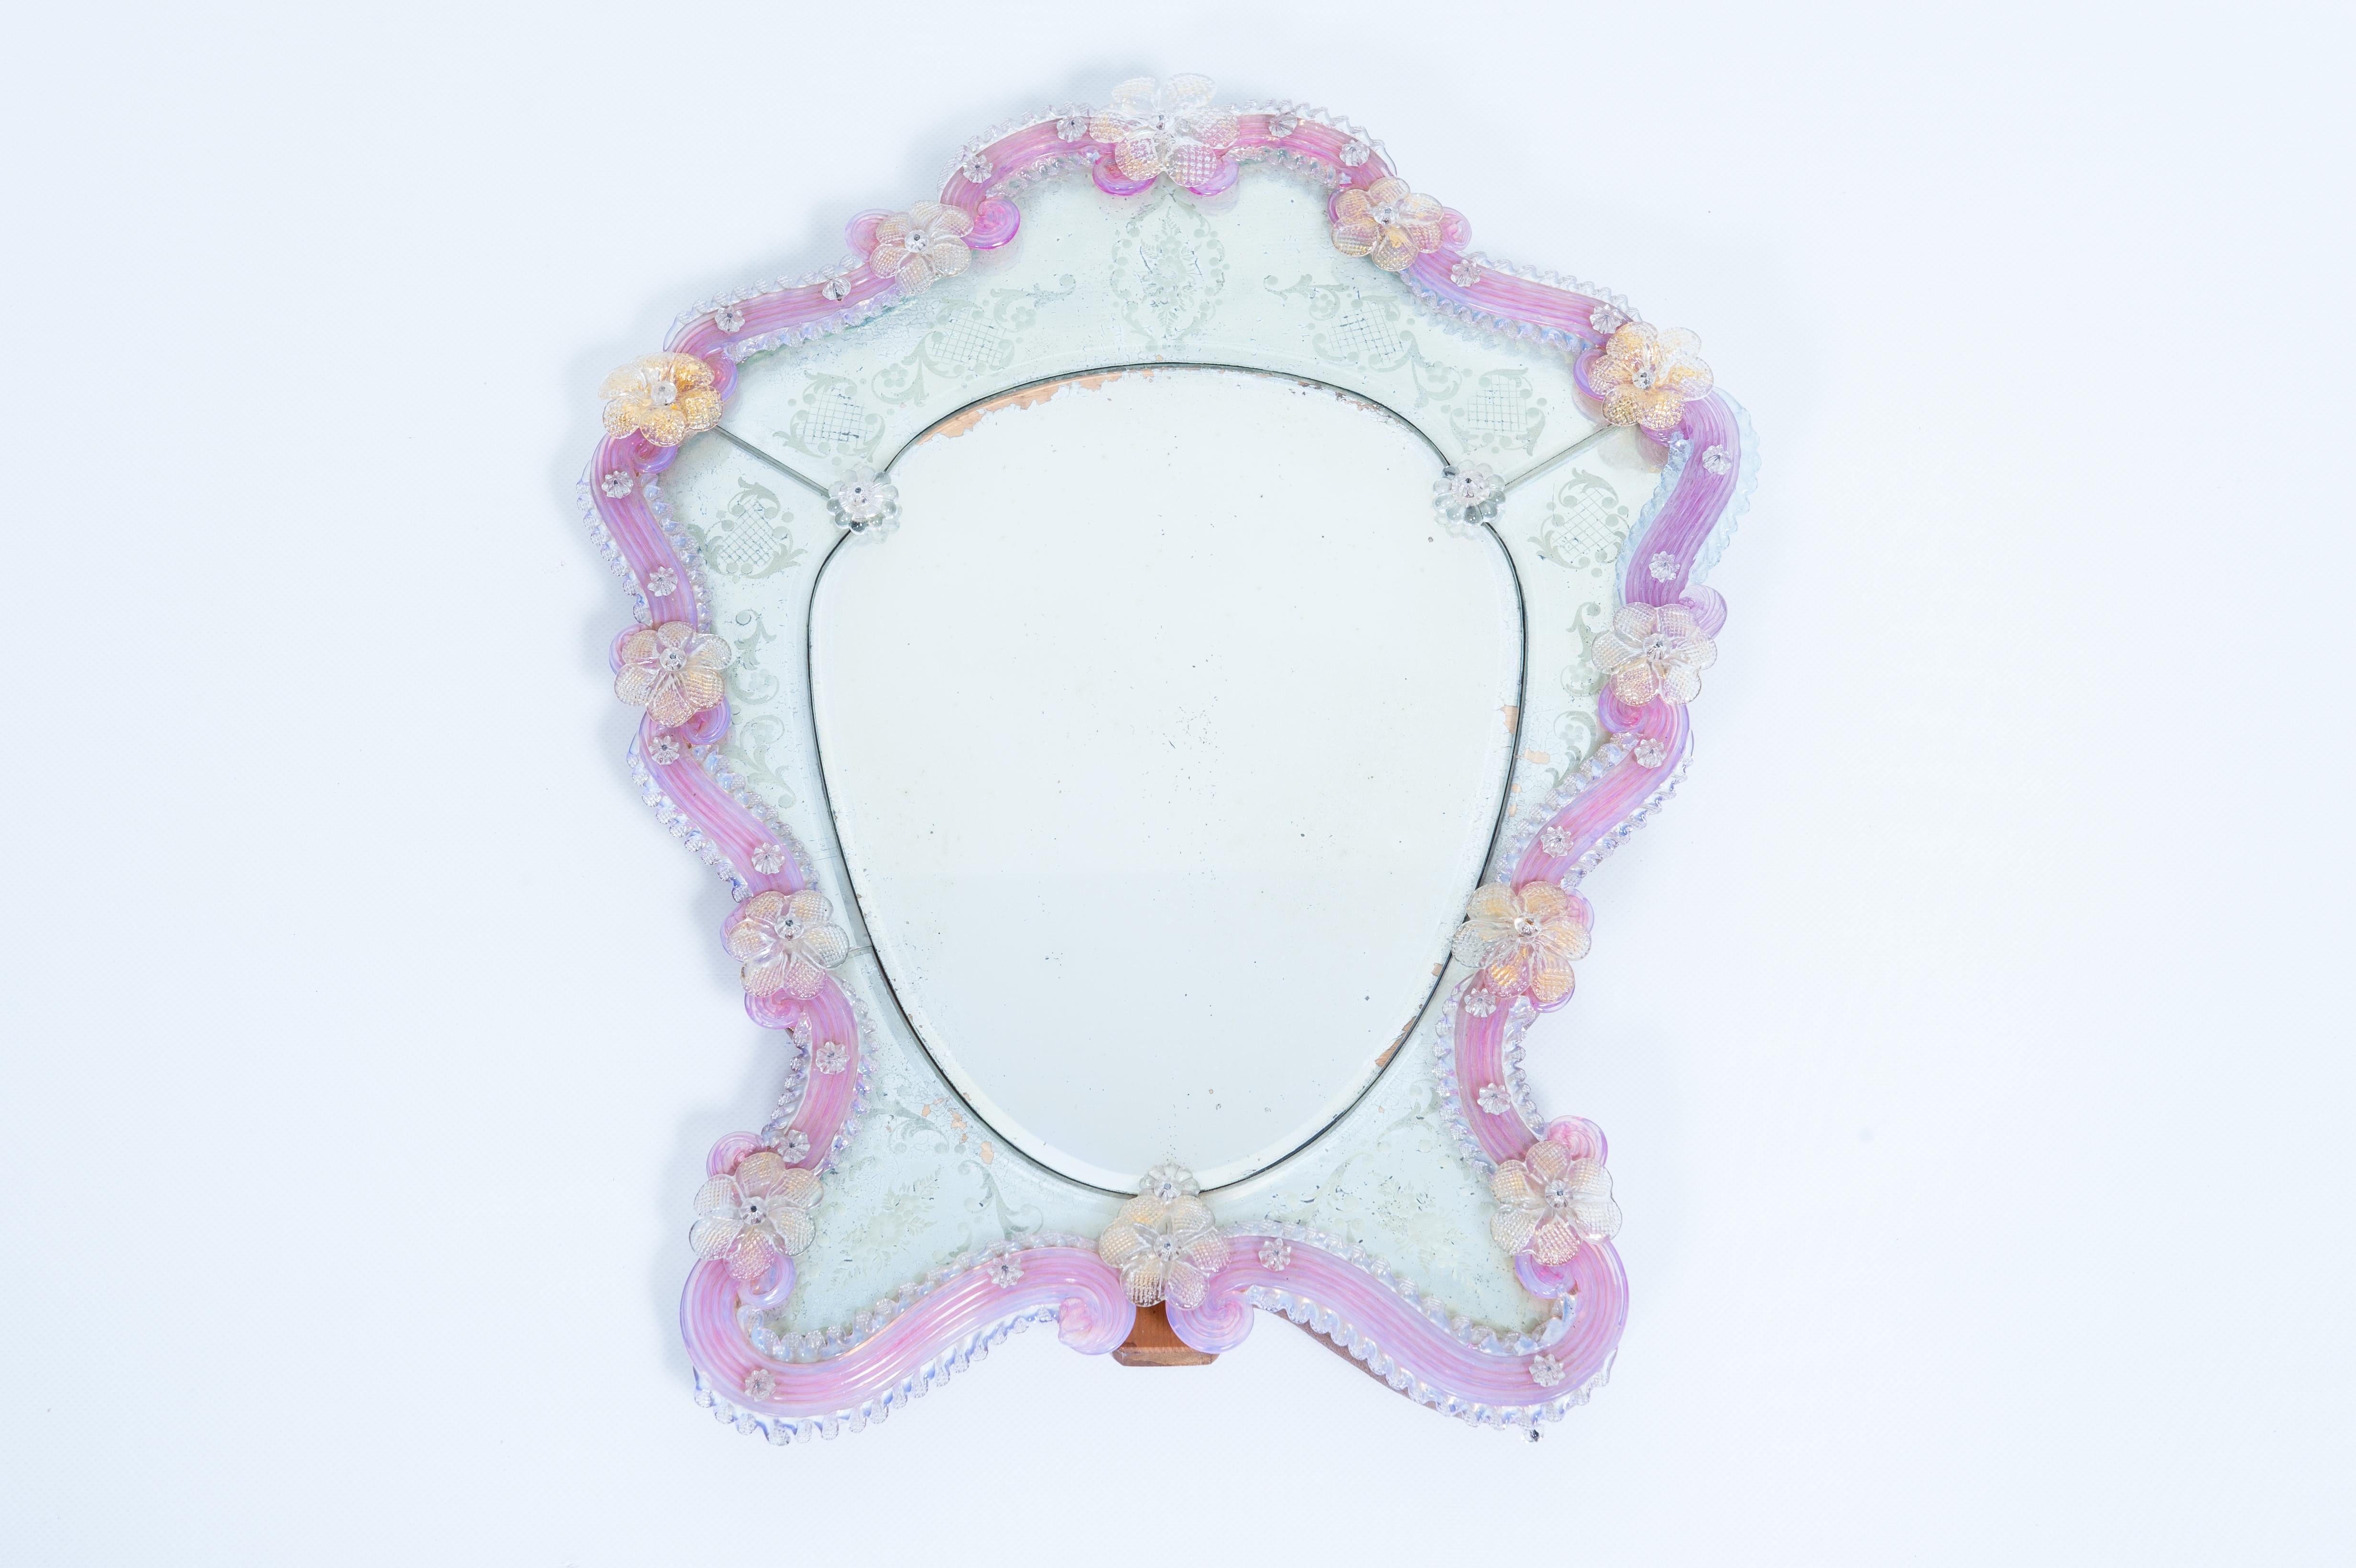 Murano Glass Table Mirror with Engravings and Pink Floral Decoration 1950s Italy.
Discover this refined and original Murano glass table mirror from the 1950s that will satisfy the most discerning customer. 
This is the perfect table mirror to